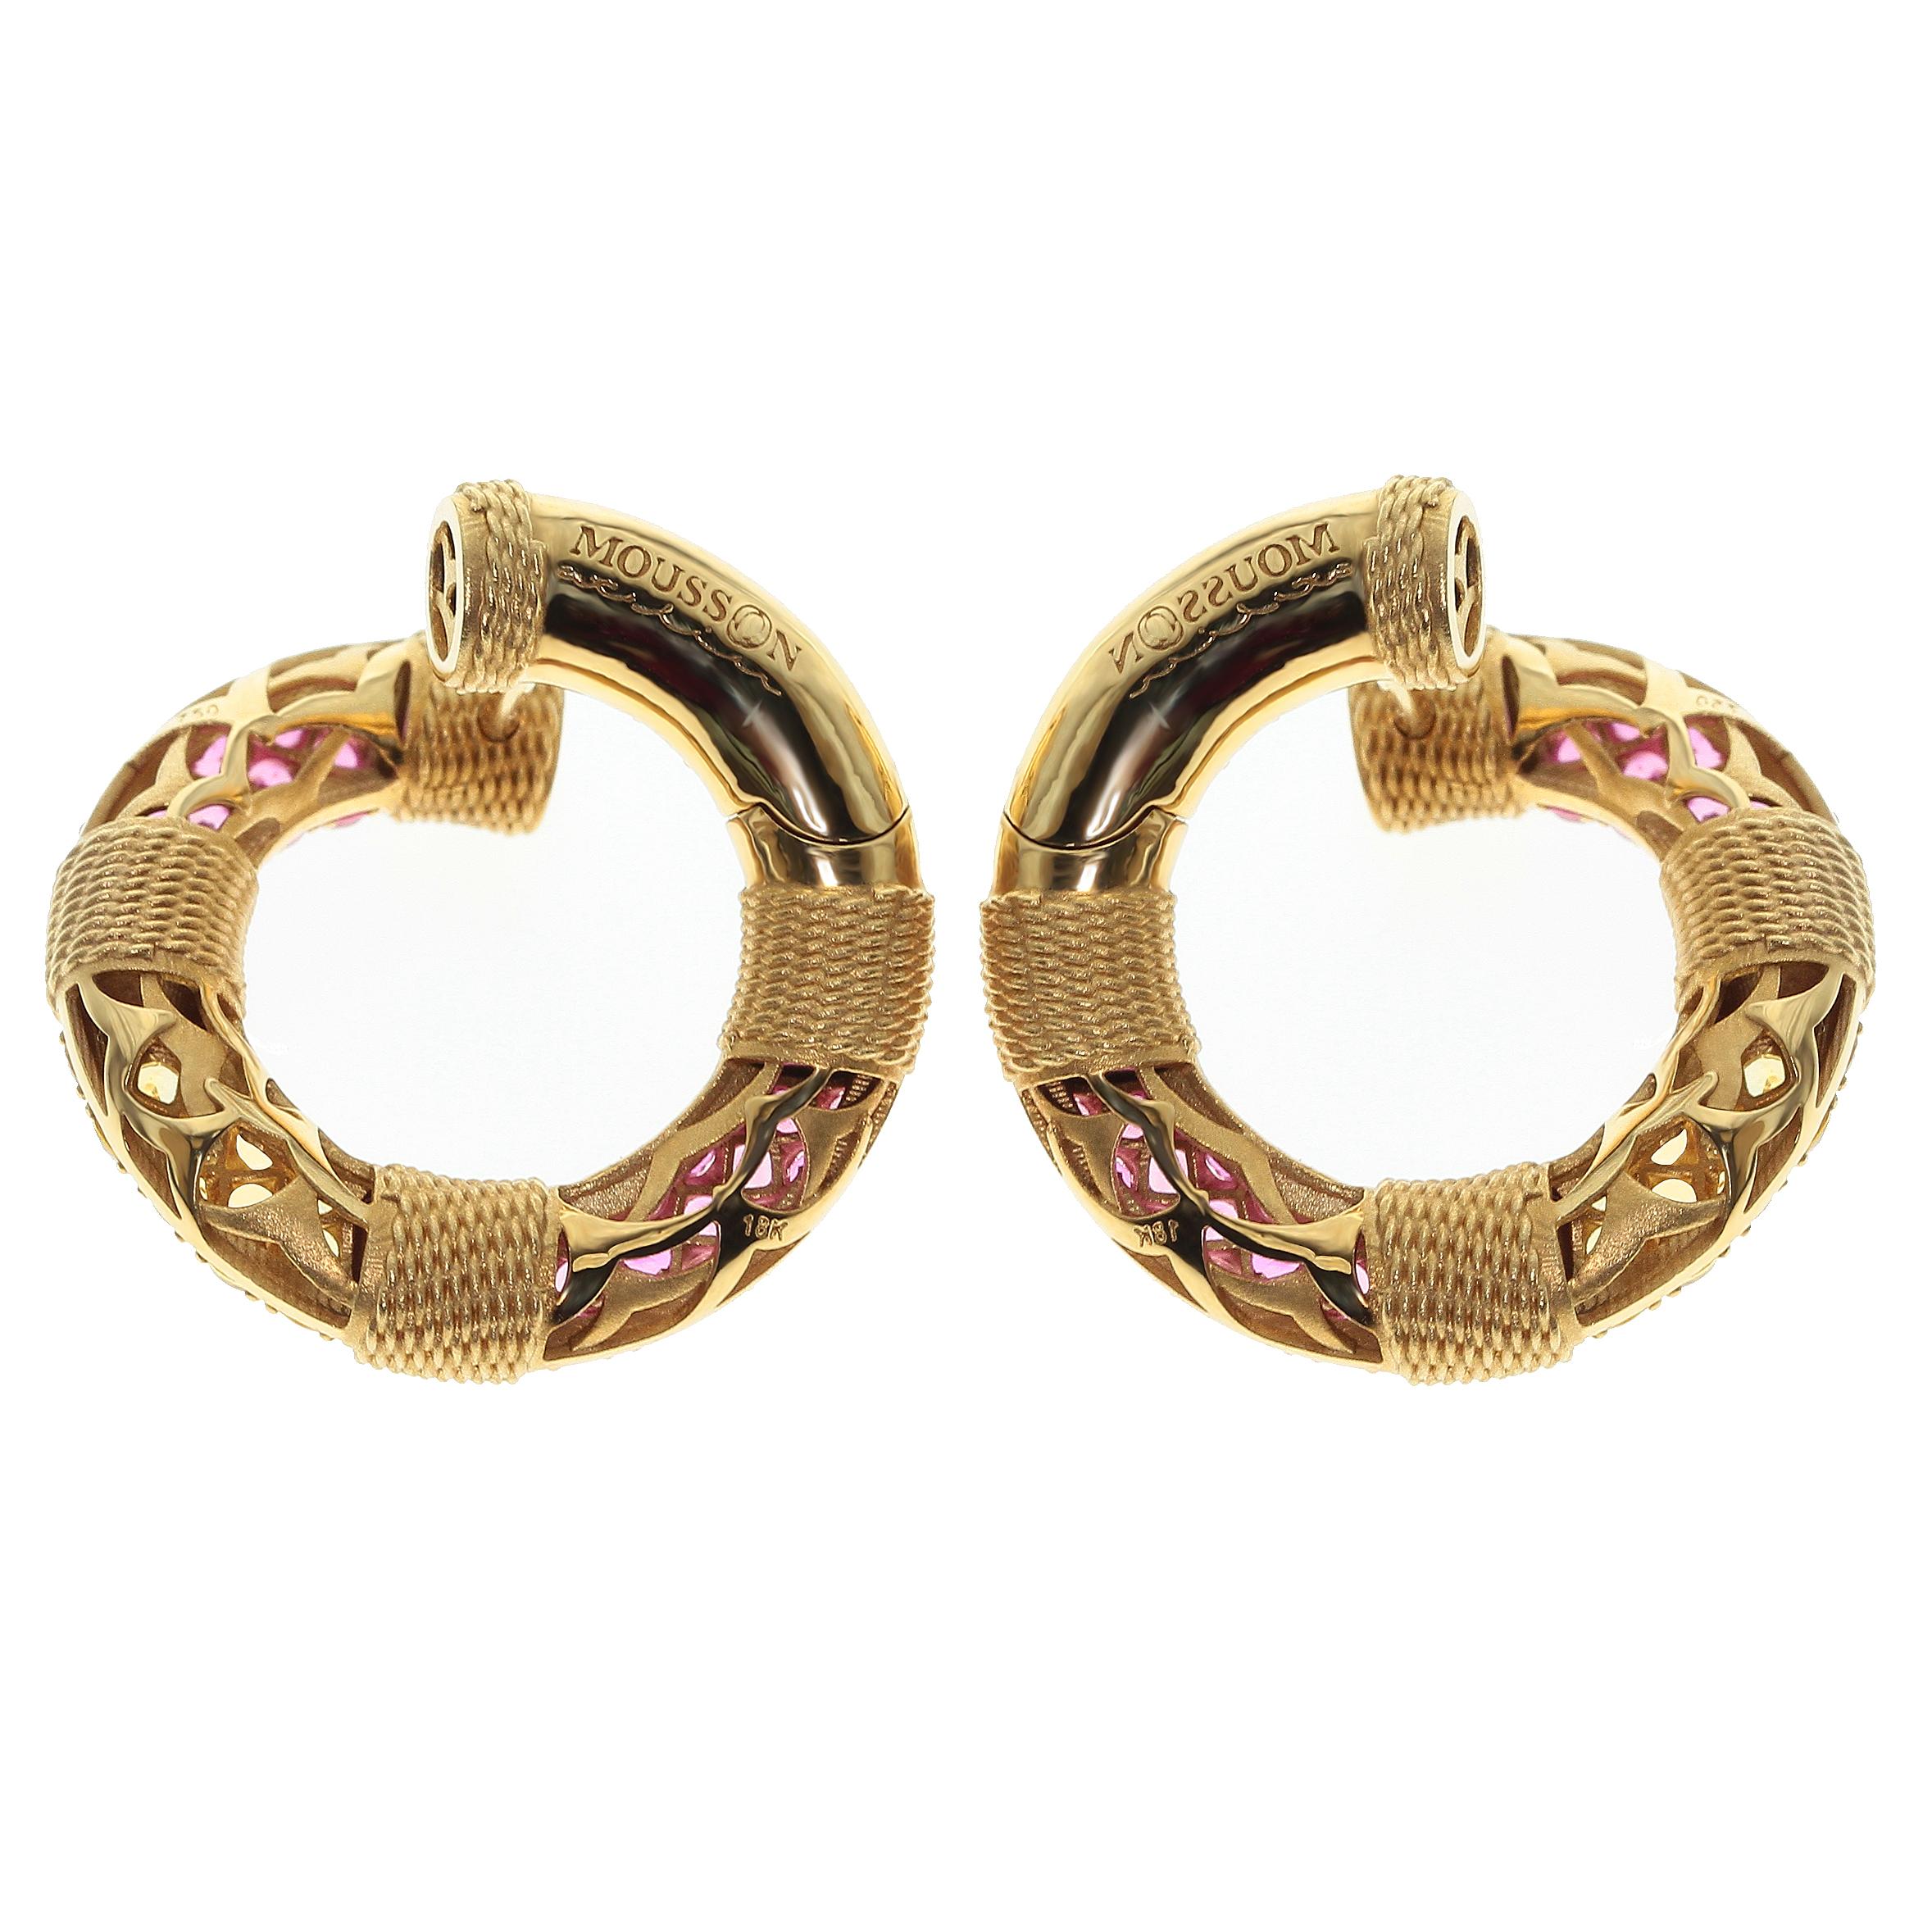 Yellow and Pink Sapphire 18 Karat Yellow Gold Lifebuoy Earring
From our Marina Collection. As a present, speaks himself: Lifebuoy - save in love with you
Accompanied with the brooch LU116414772031 and ring LU116414772011